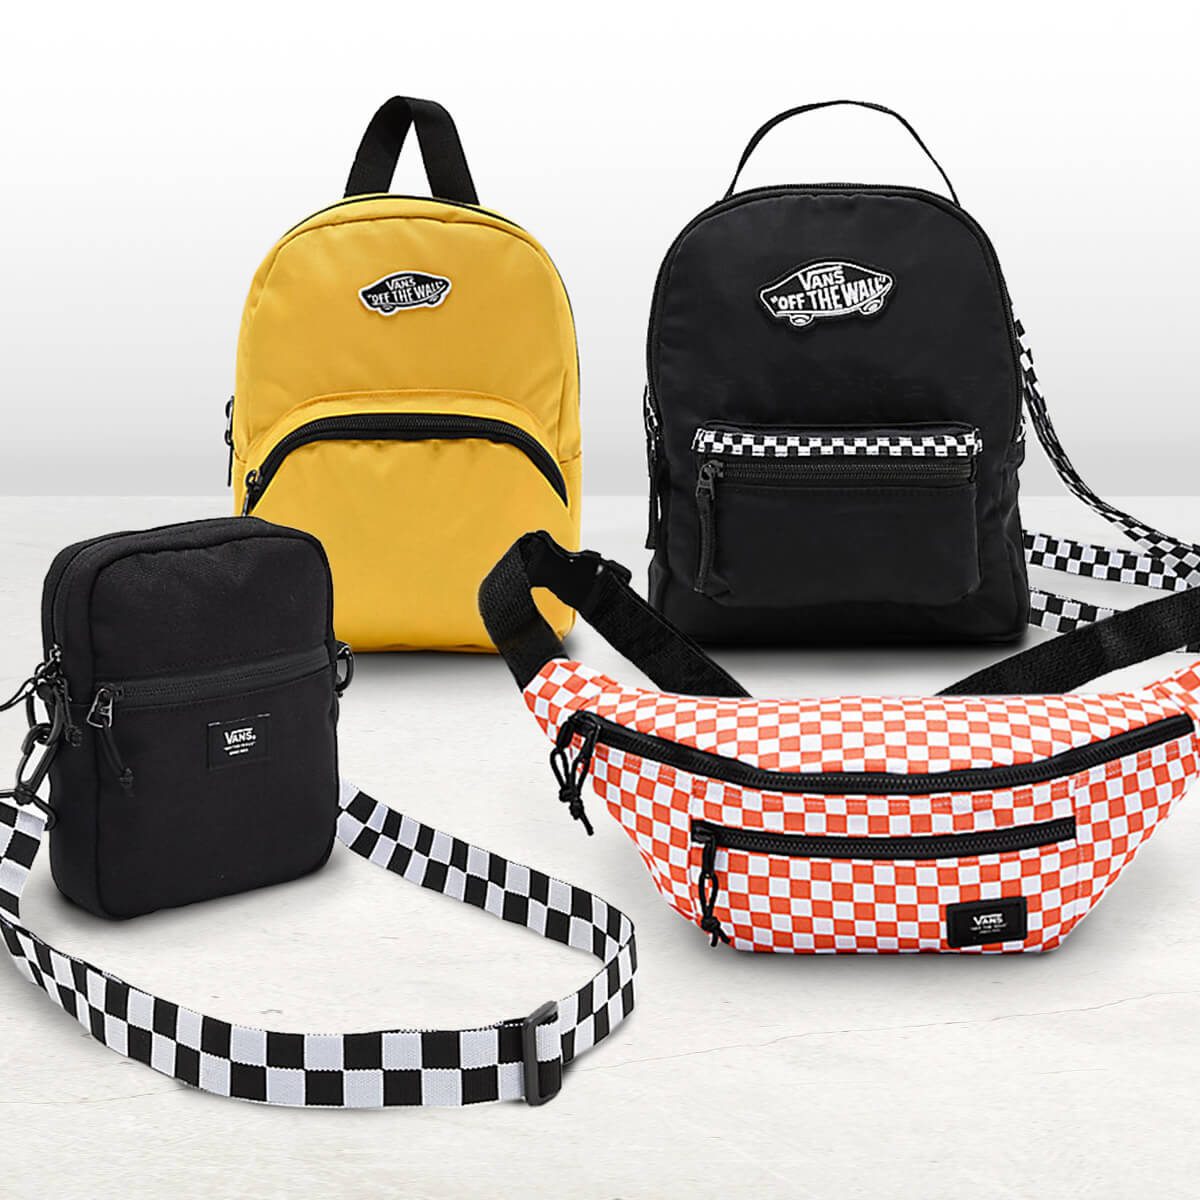 MORE COLORS AND STYLES LANDING FROM VANS - SHOP BAGS